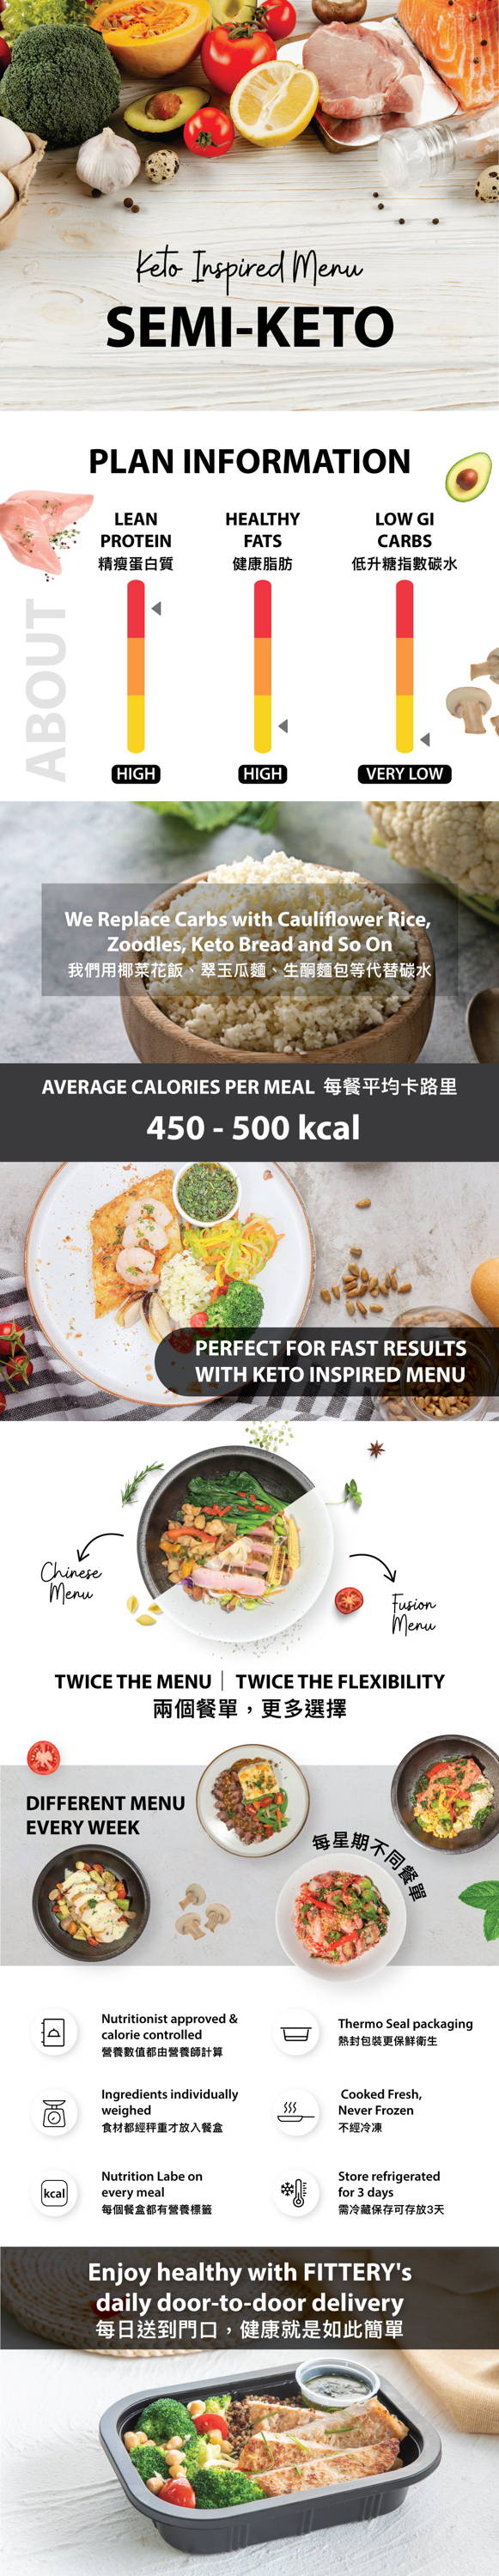 FITTERY Semi-Keto Meal Plan - Perfect for fast results with keto inspired menu